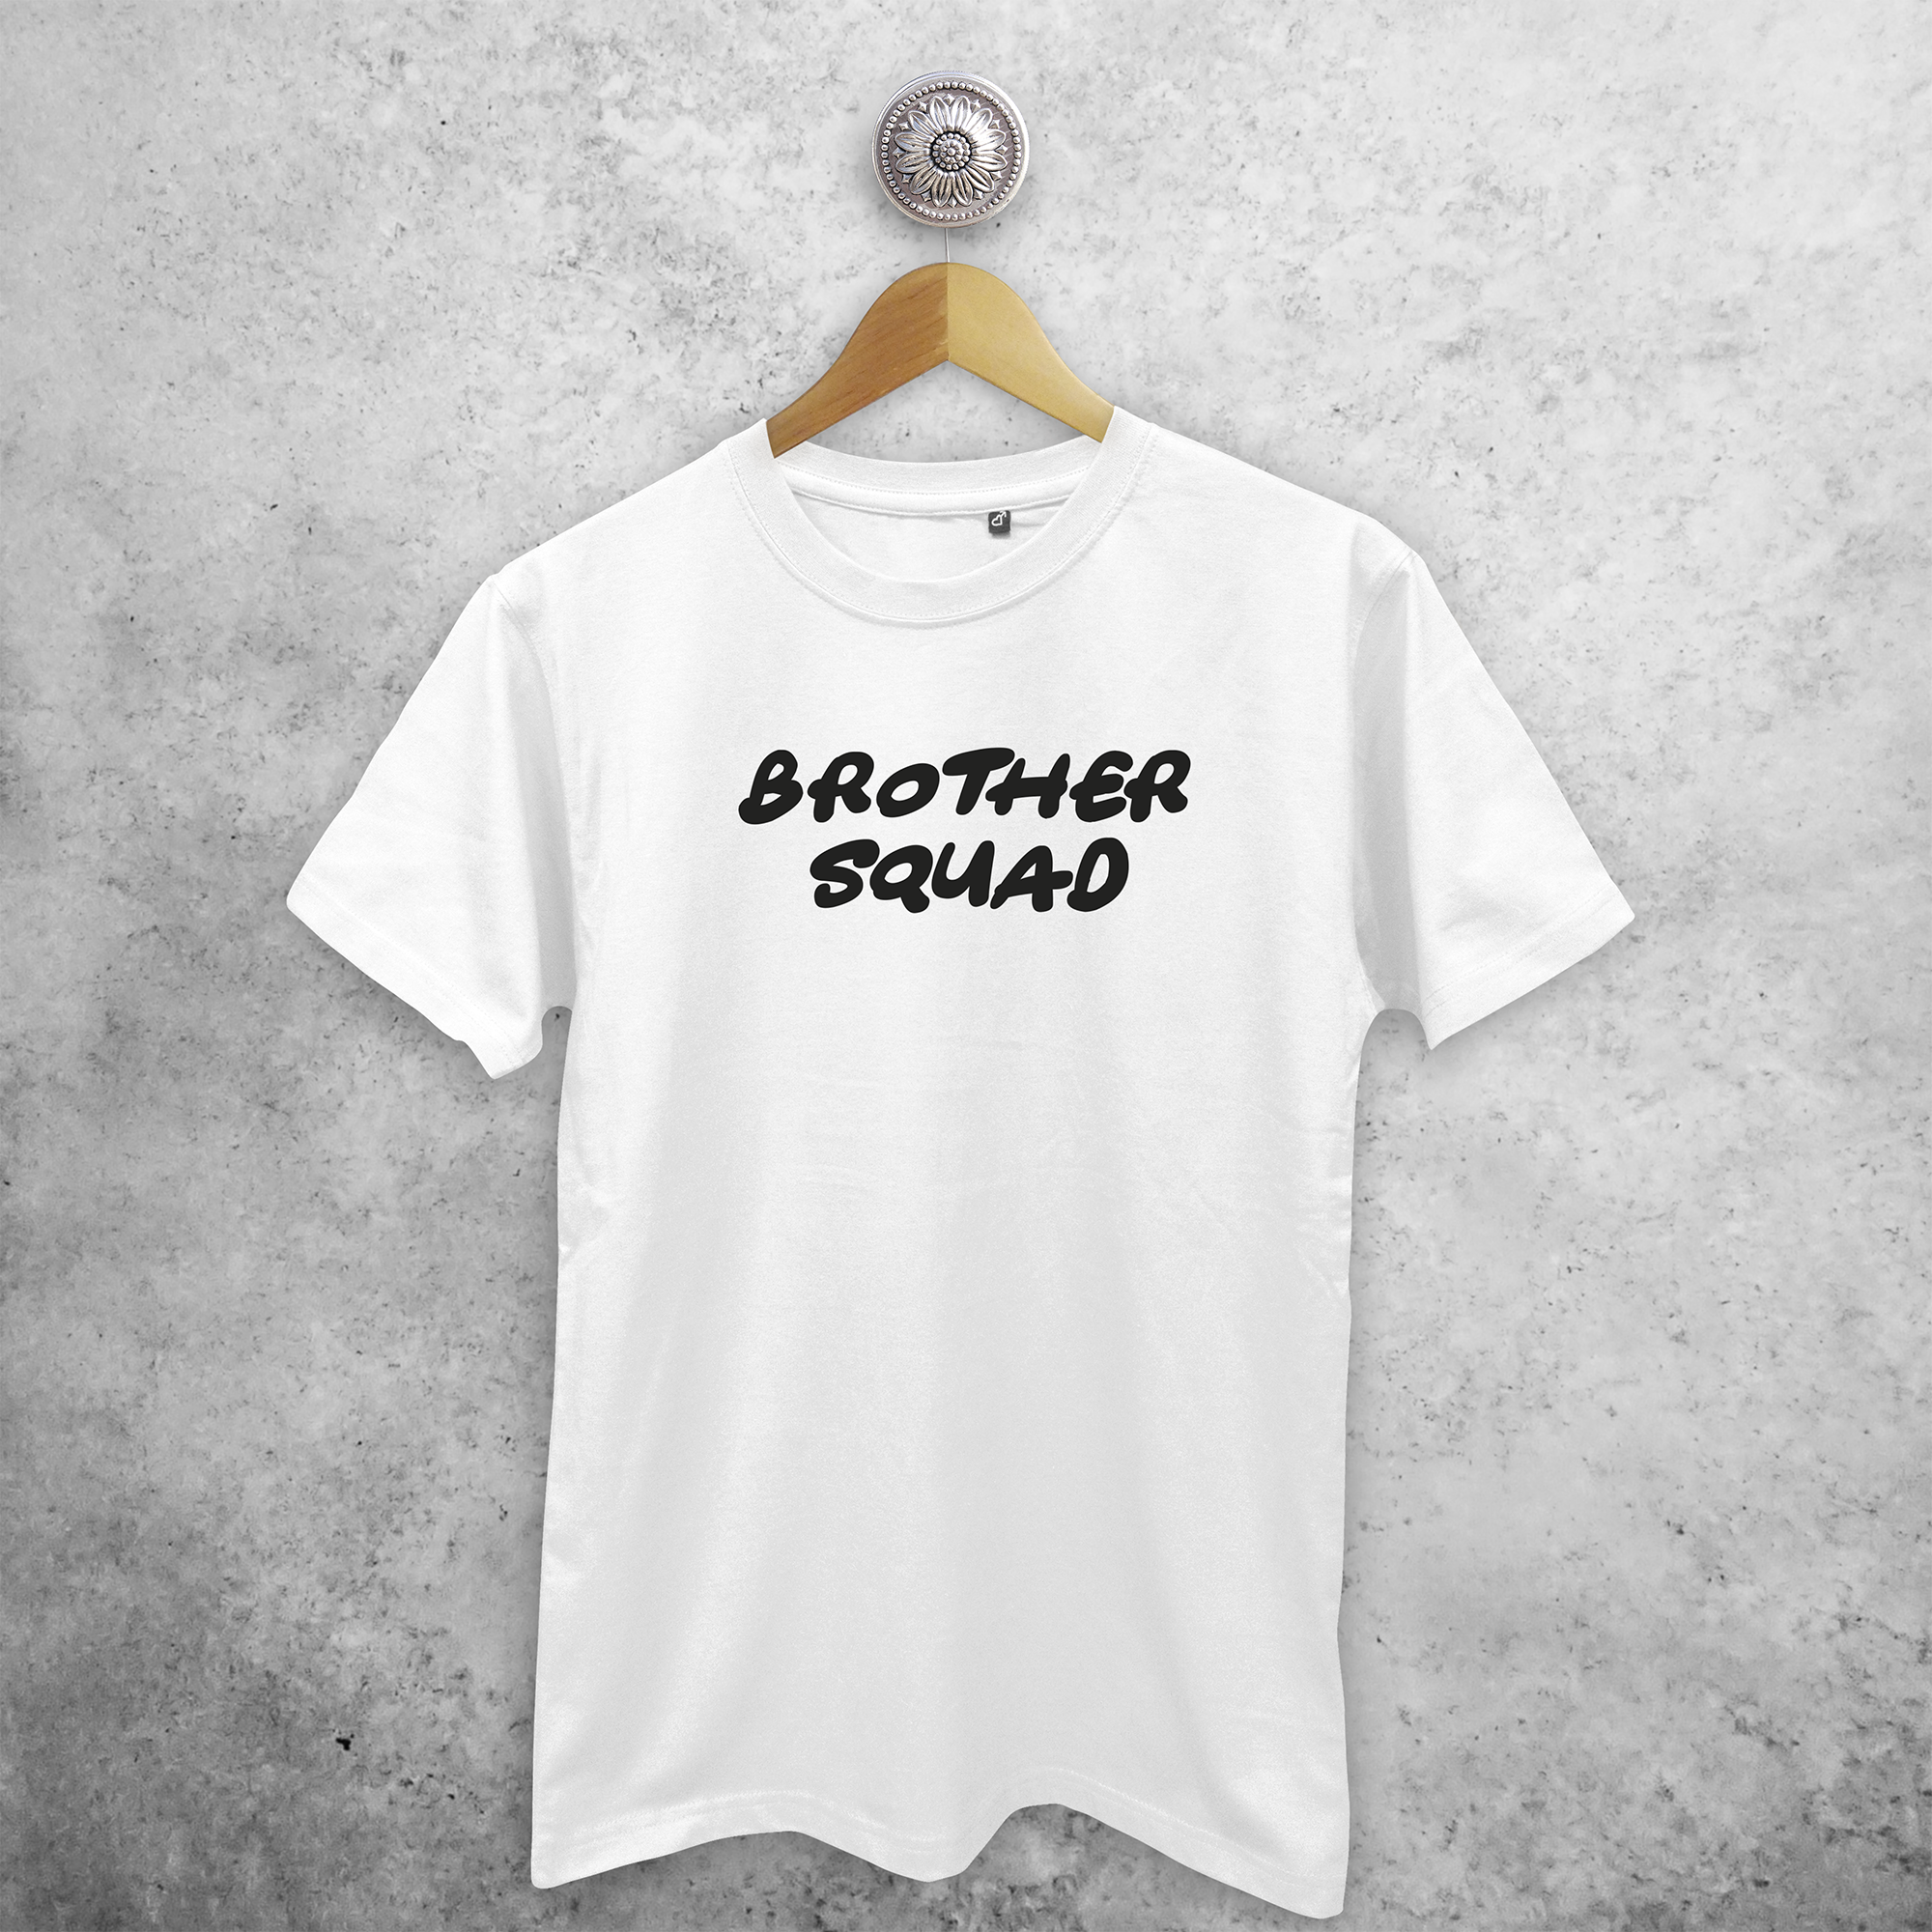 'Brother squad' adult shirt